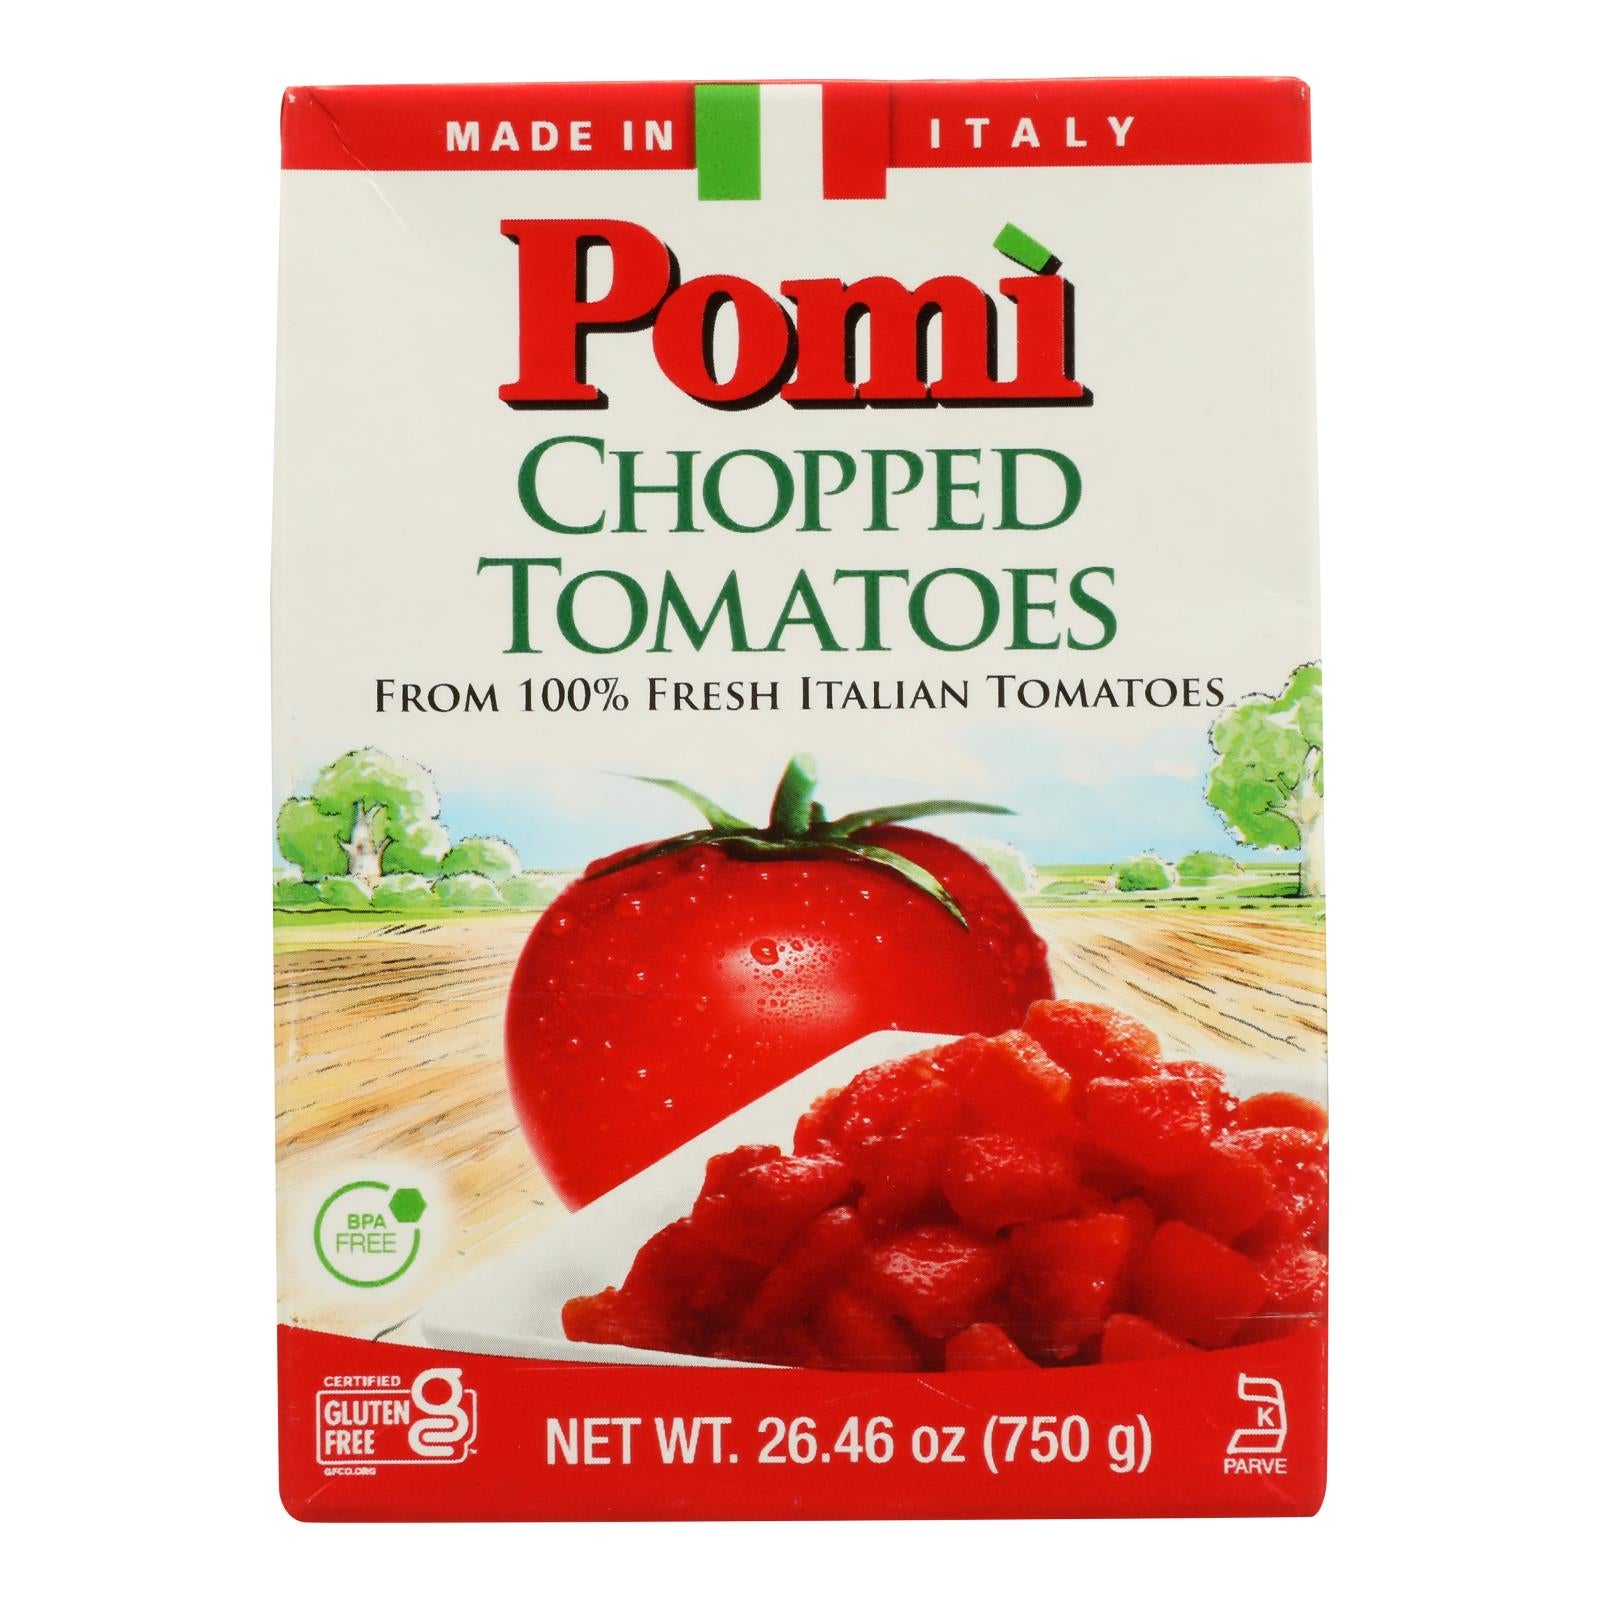 Pomi Tomatoes - Tomatoes Chopped - Case Of 12 - 26.46 Oz